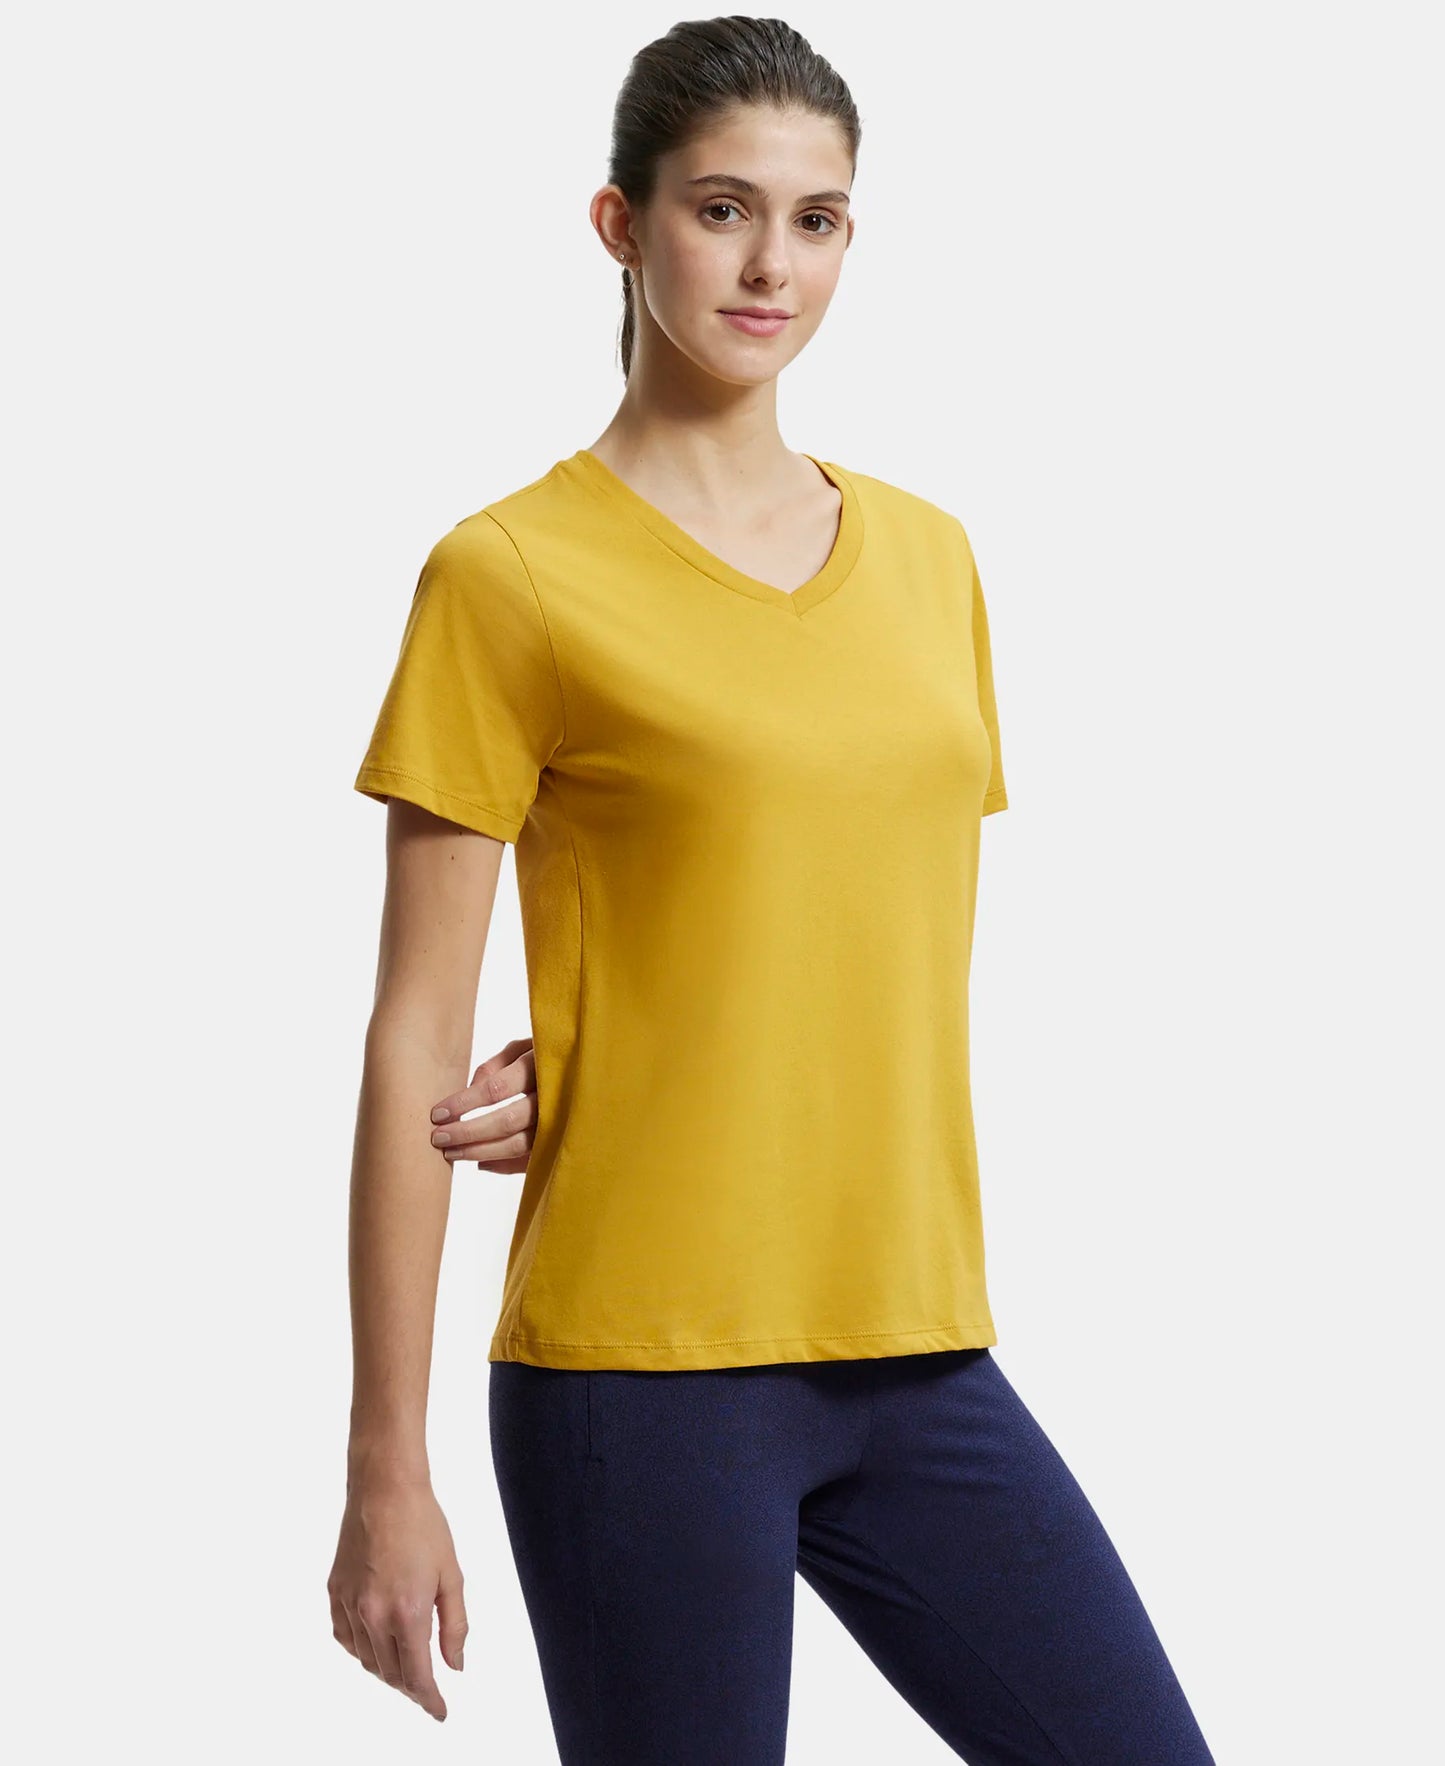 Super Combed Cotton Rich Fabric Relaxed Fit V-Neck Half Sleeve T-Shirt - Golden Spice-2